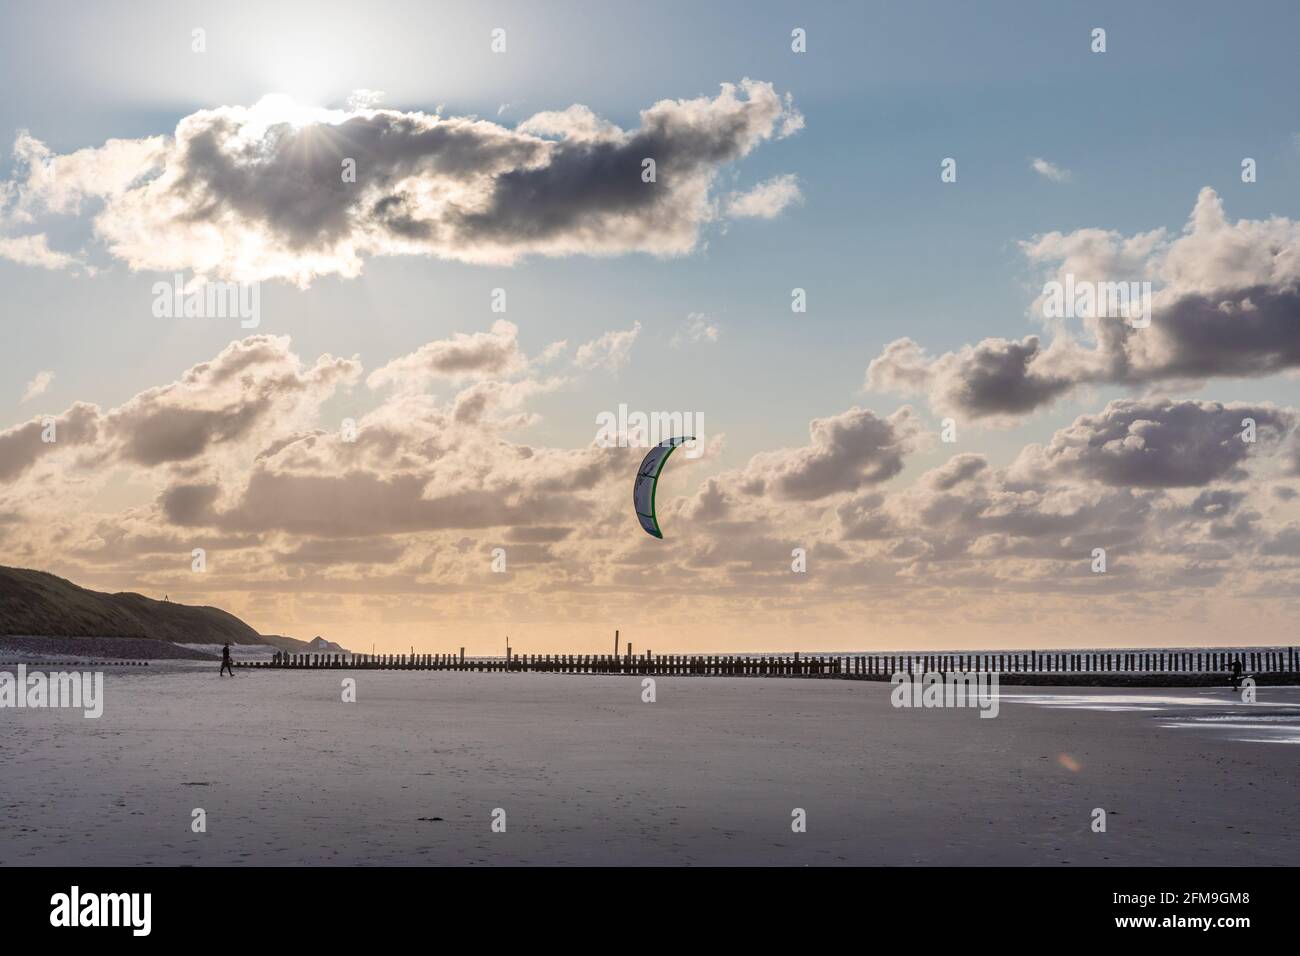 Kite on the beach at low tide on Wangerooge Stock Photo